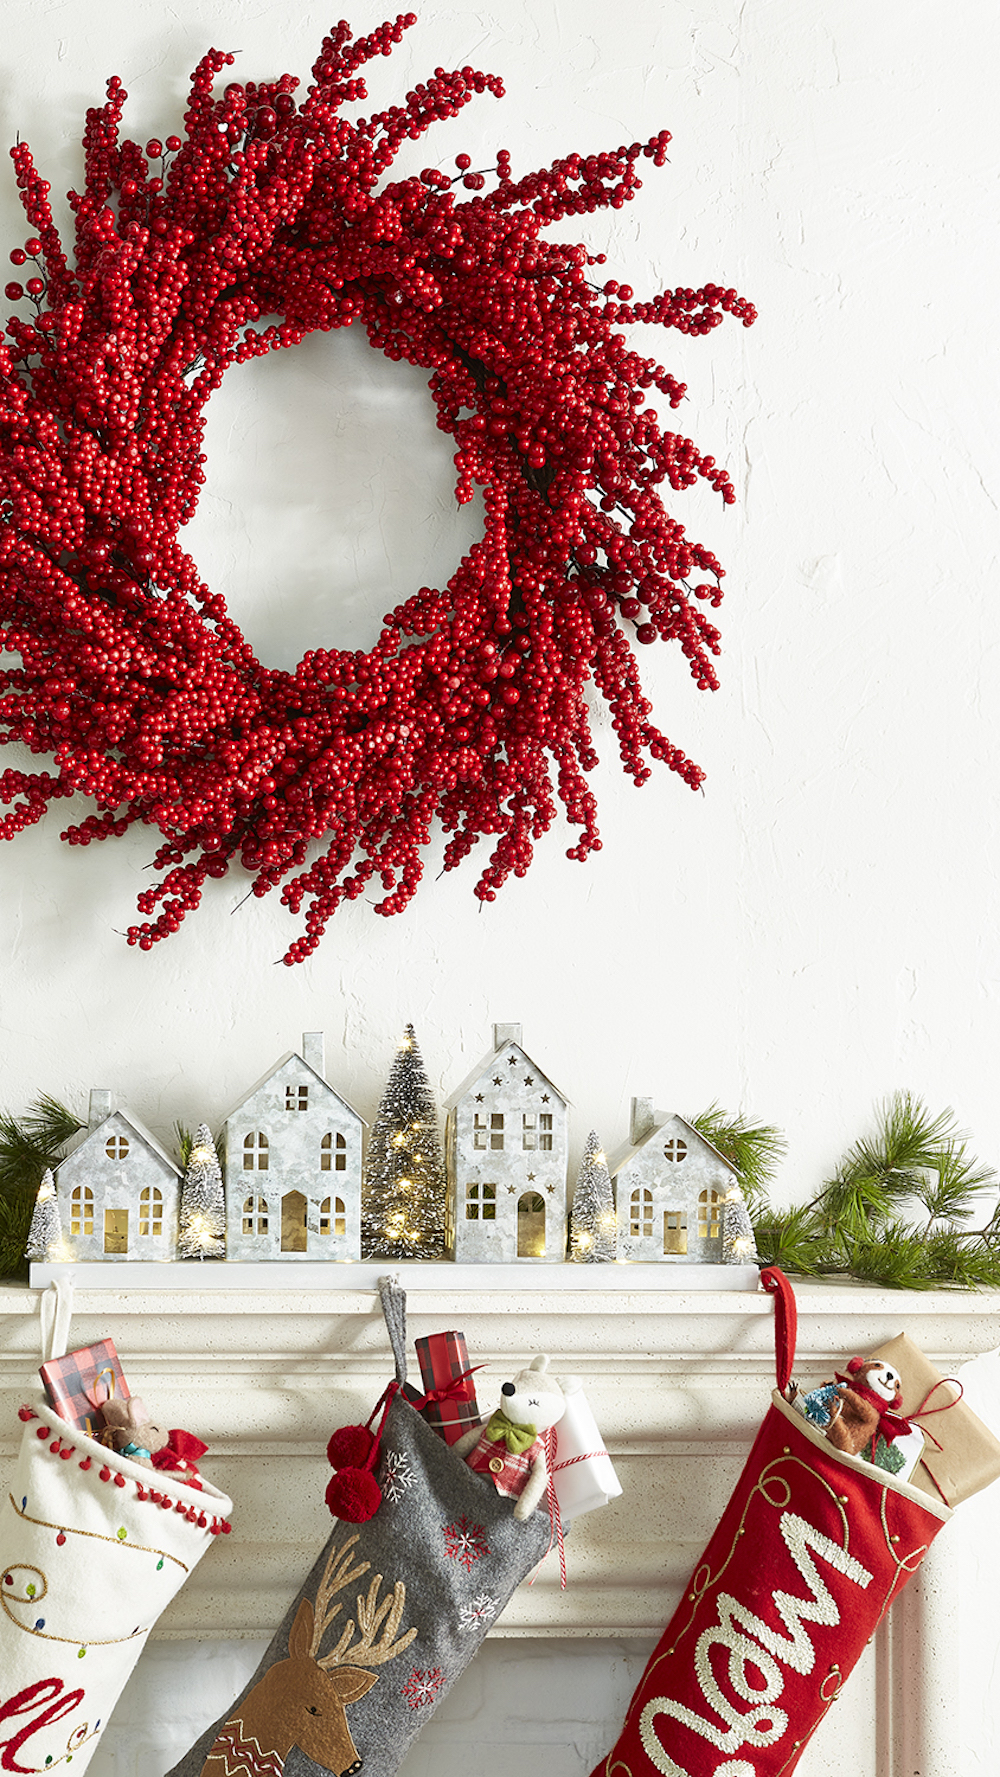 Christmas decoration scene featuring items from HomeSense with metal light up houses on a white mantle, a large red holly wreath hanging on the wall above it, and three stuffed stockings hanging down